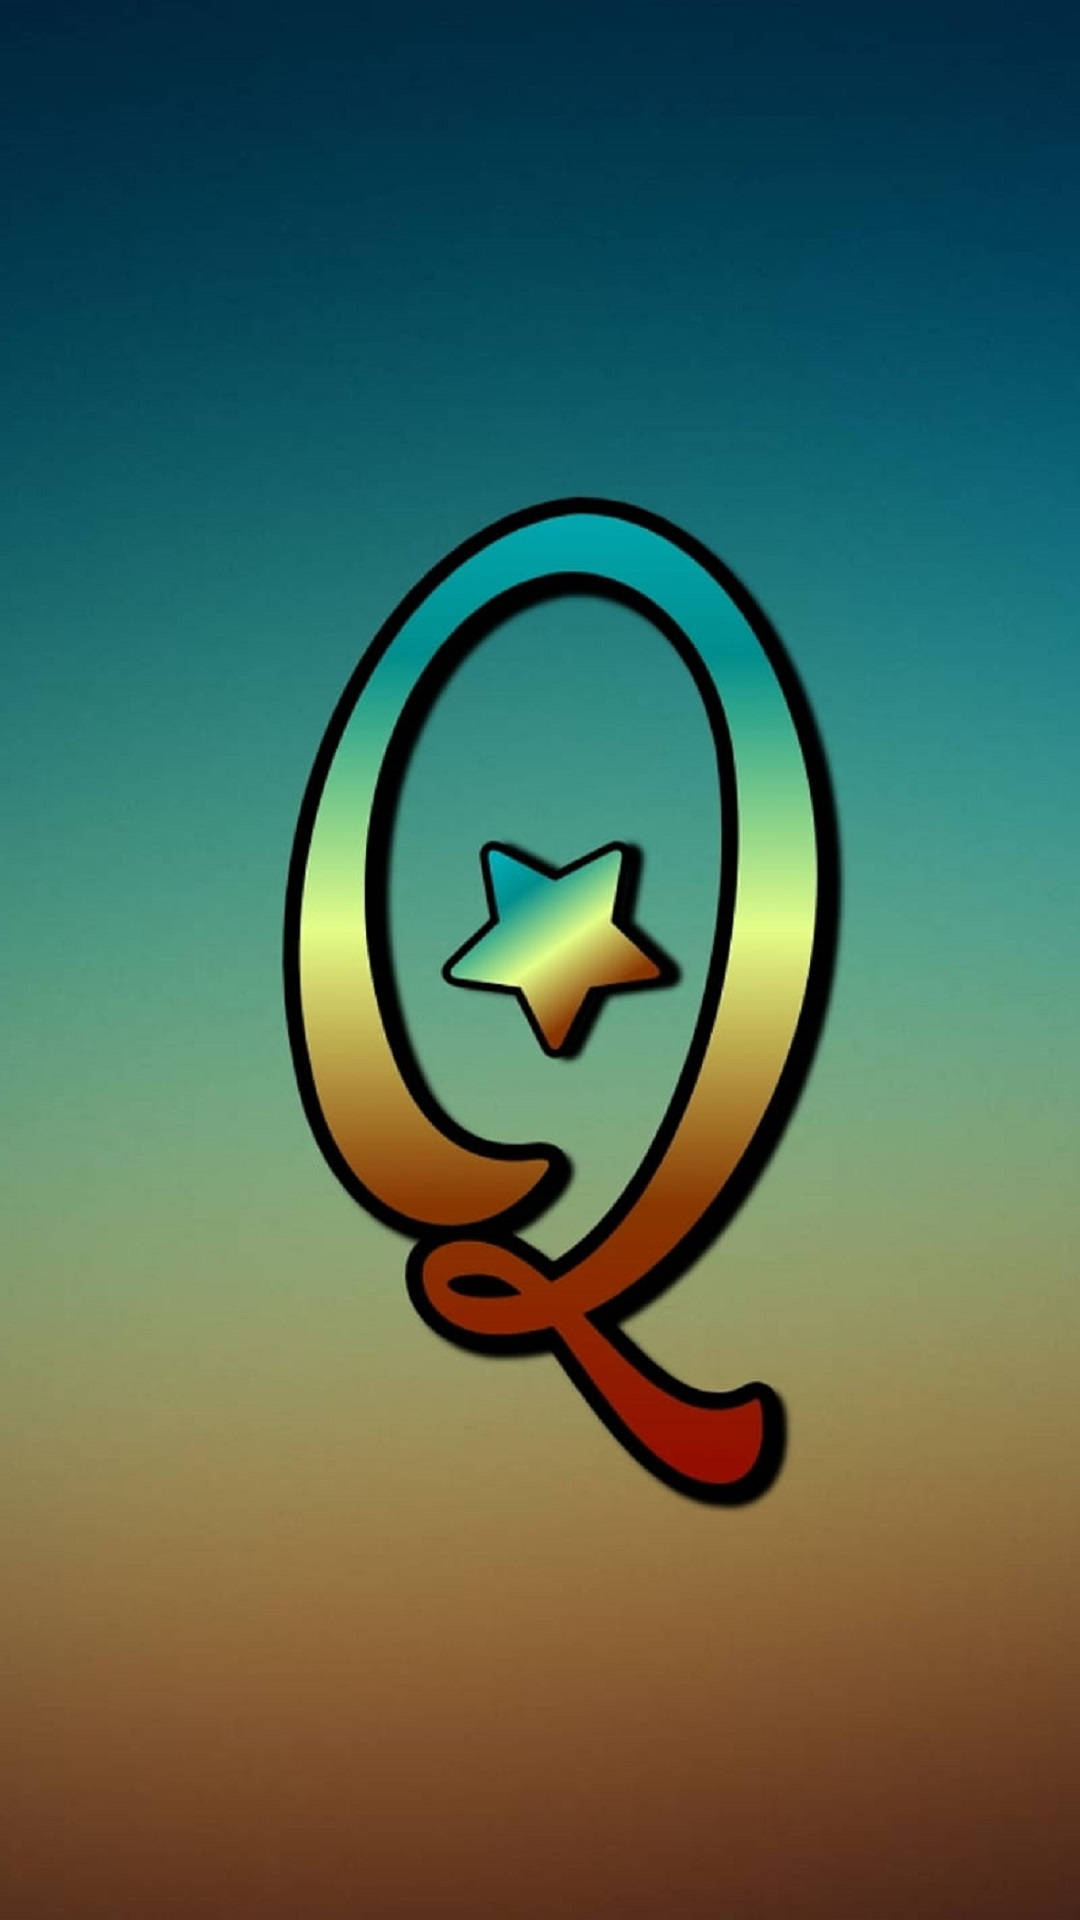 Letter Q With A Star Icon Background